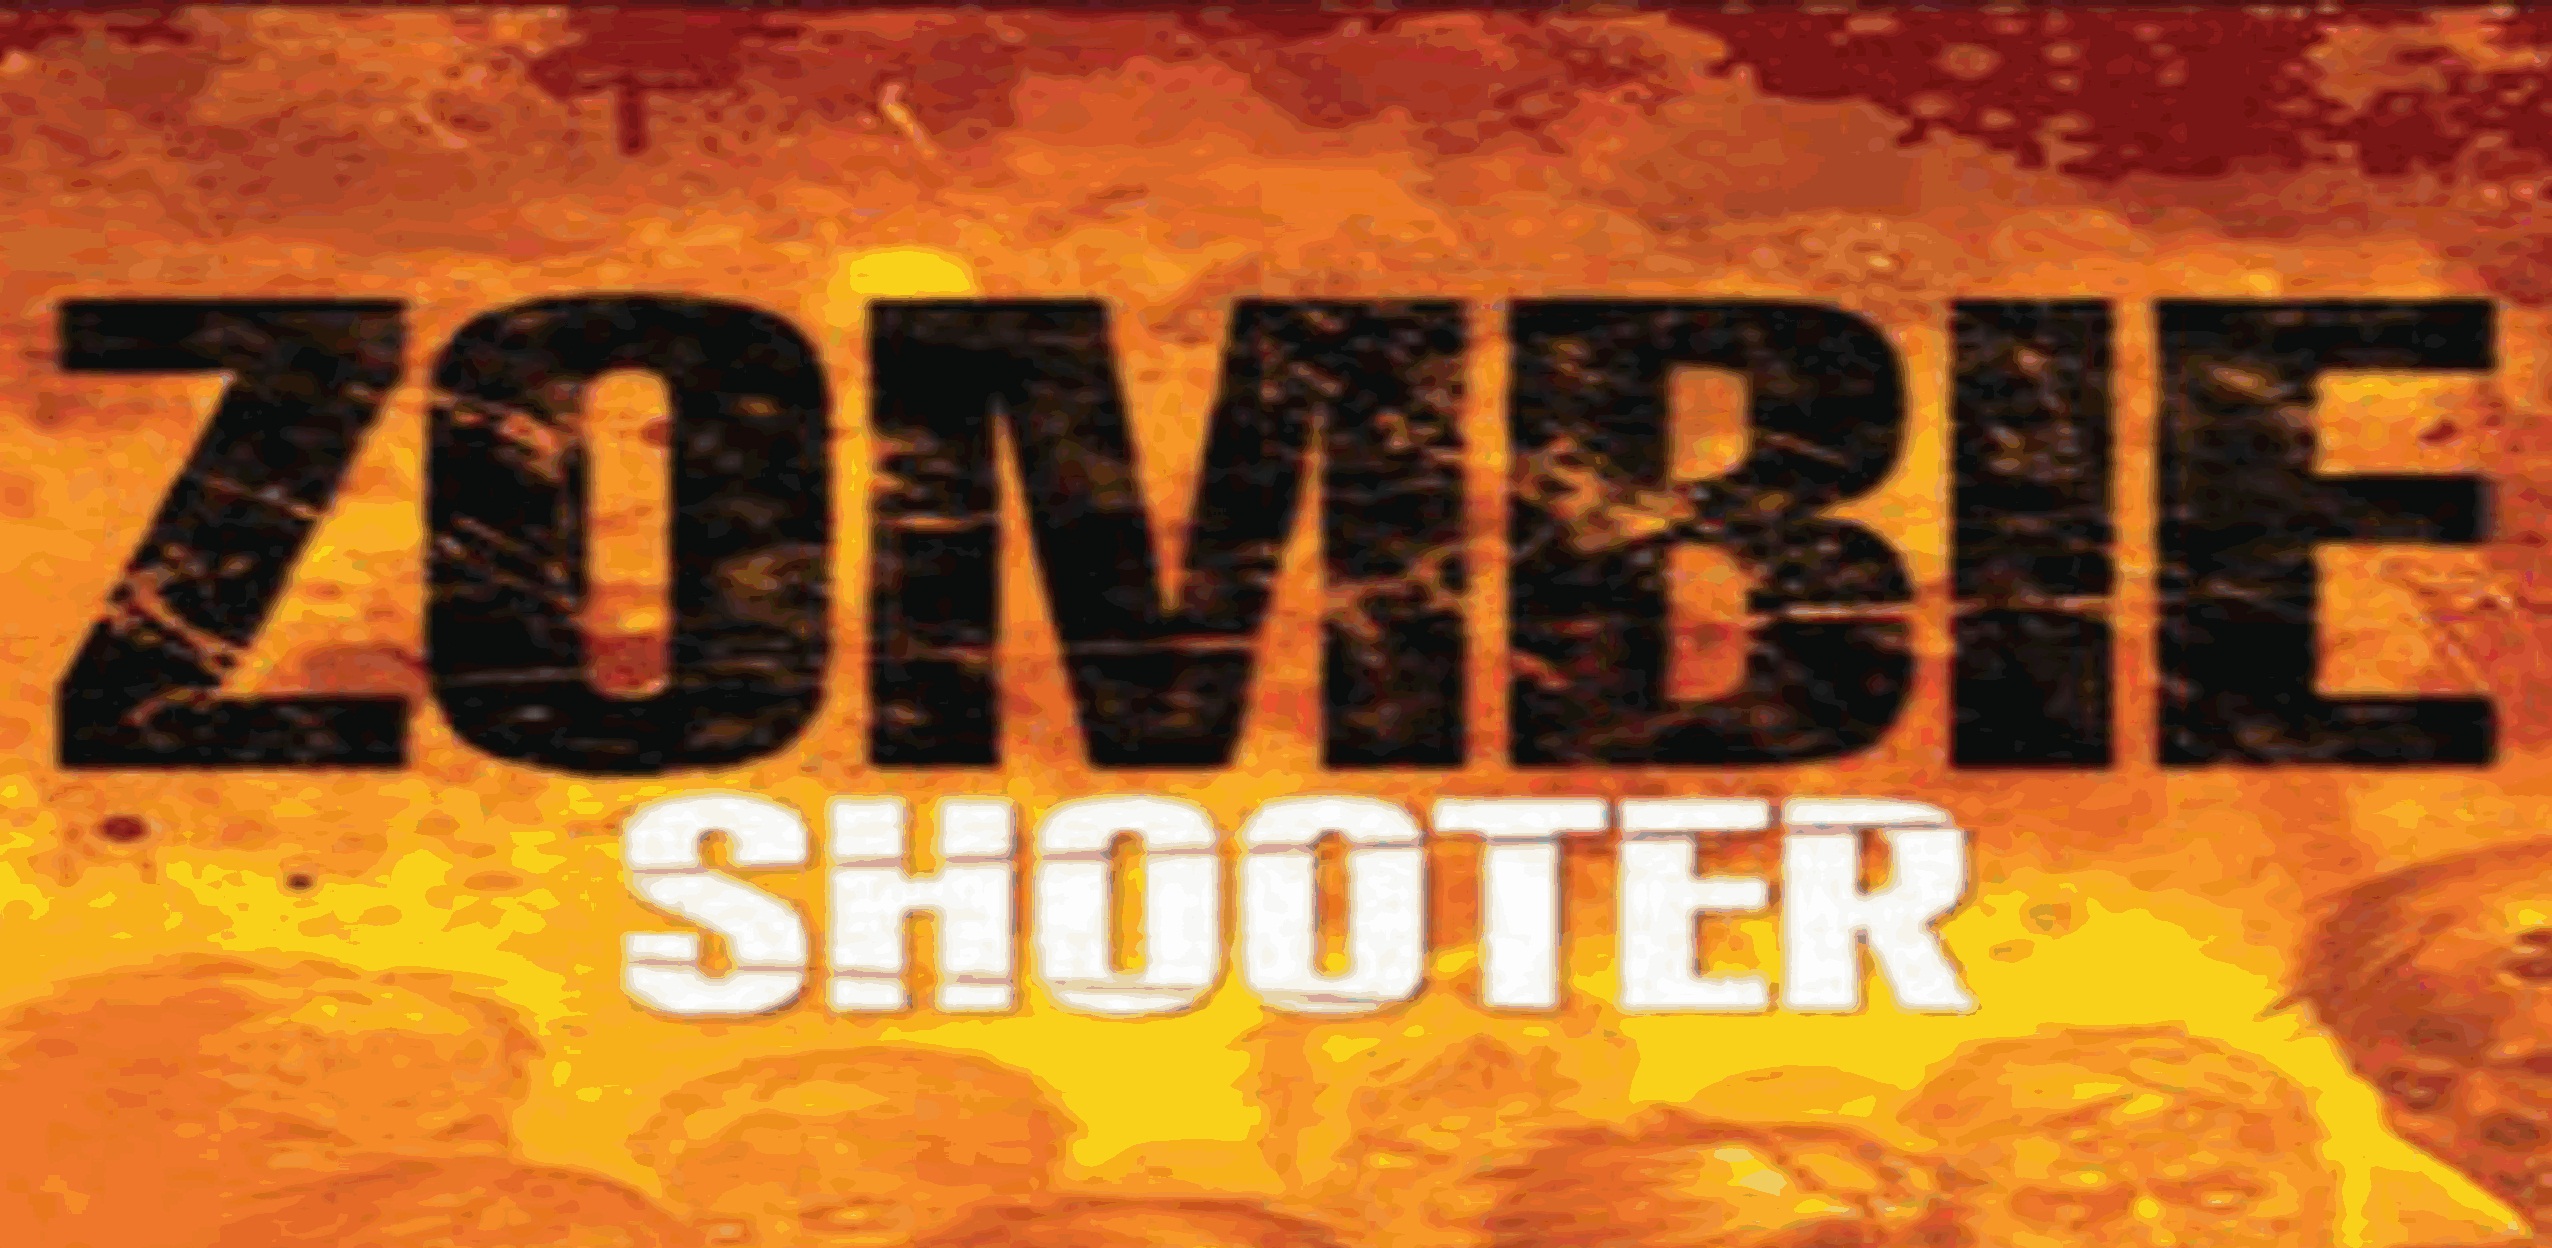 zombie shooter 3 pc games free download